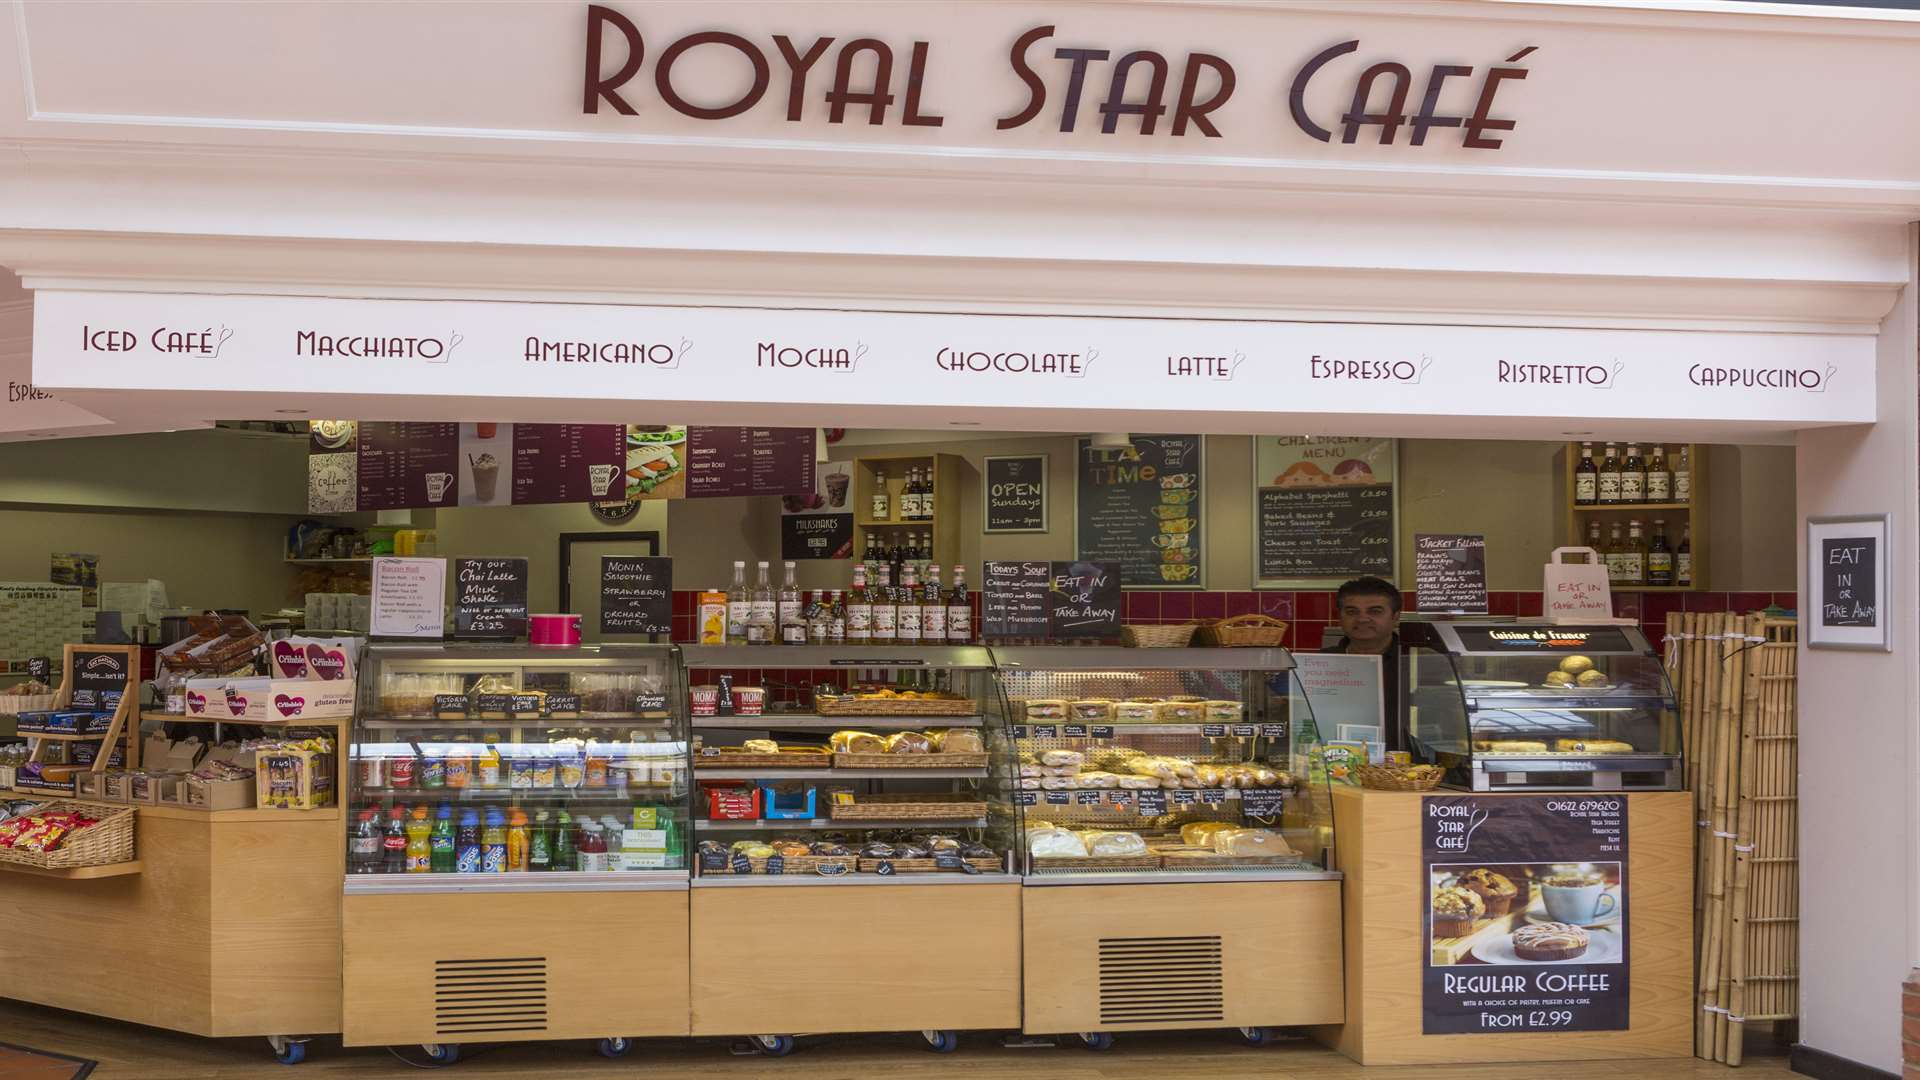 Royal Star Cafe, in the Royal Star Arcade, Maidstone